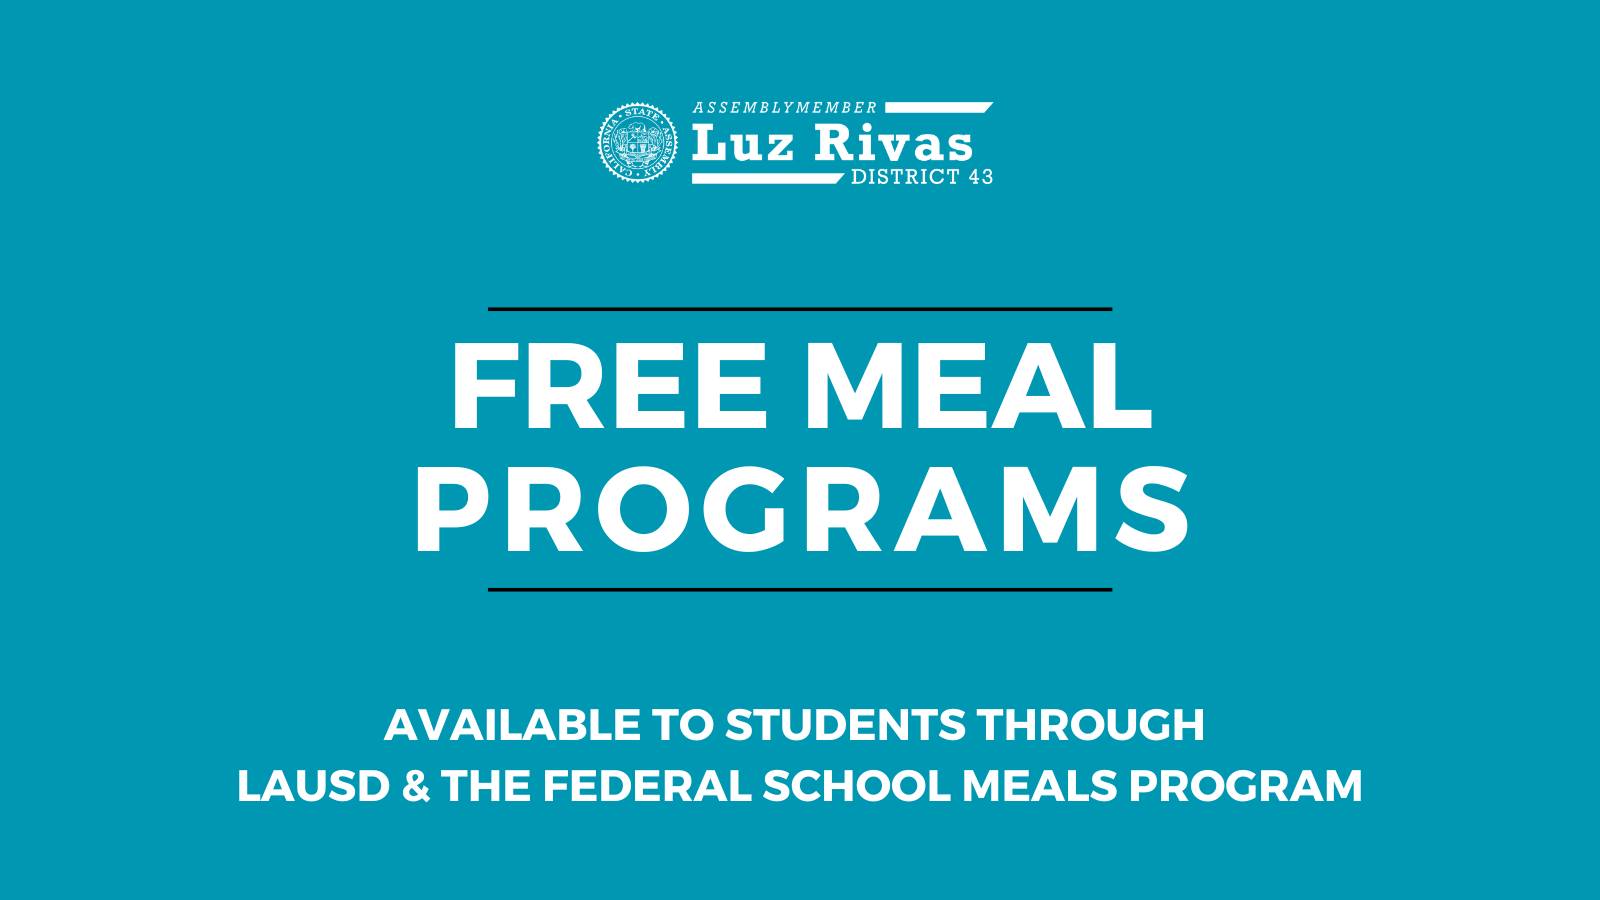 Several Free Meal Programs available to Children